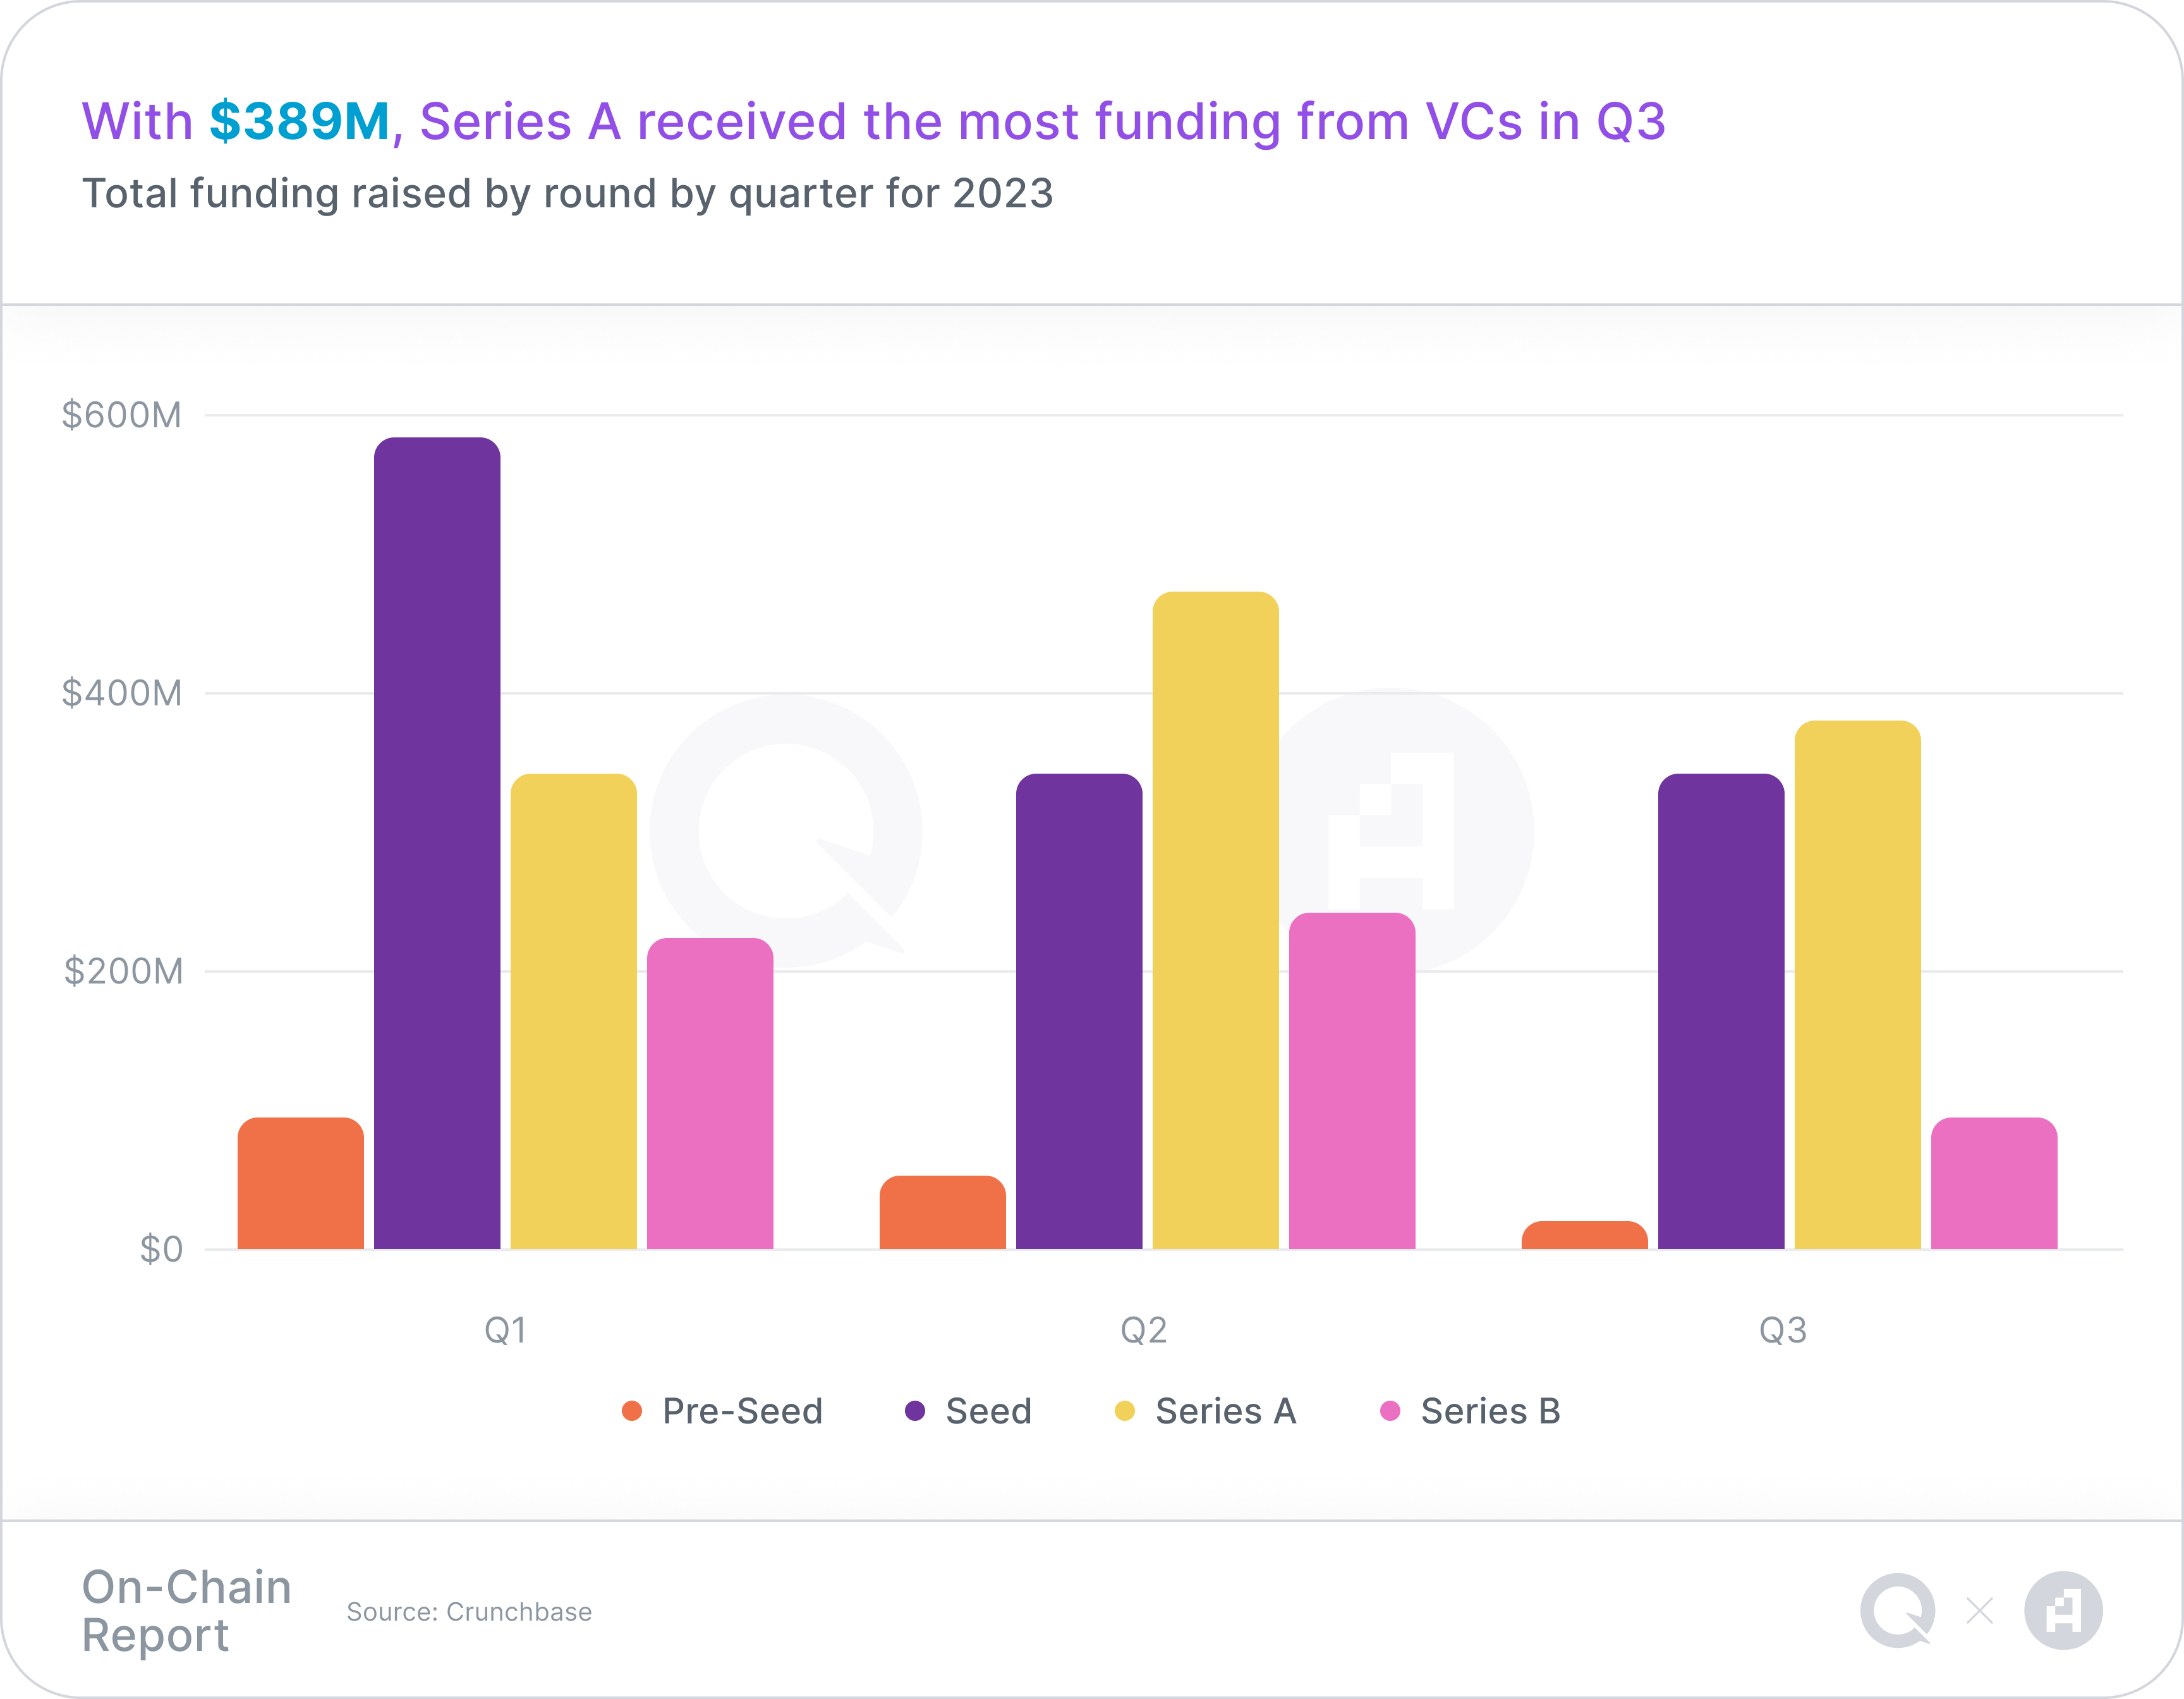 A chart representing Total funding raised by round by quarter for 2023, with a takeaway headline of "With $389M, Series A received the most funding from VCs in Q3"